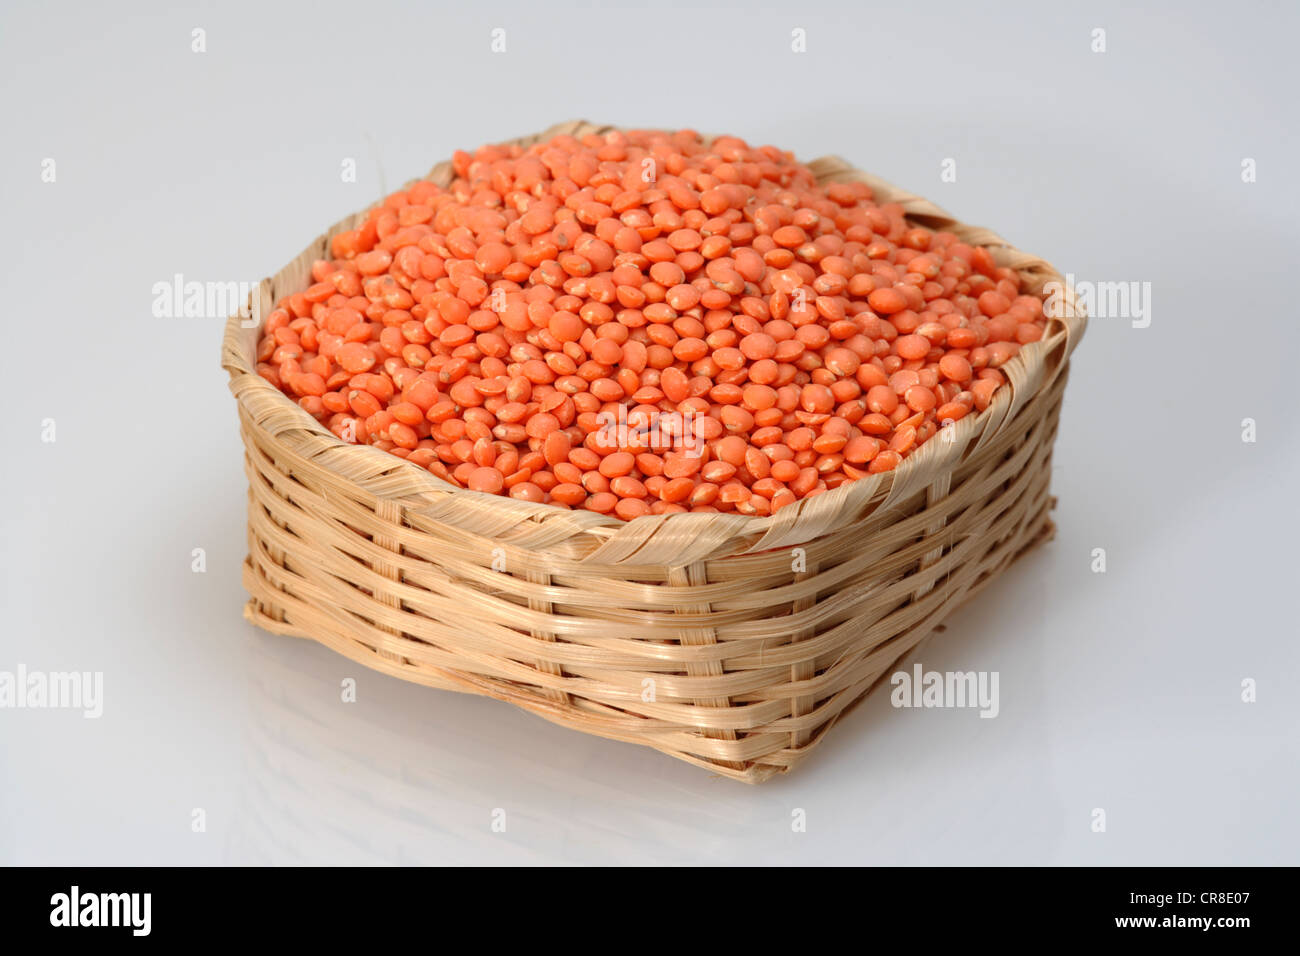 Red lentils (Lens culinaris), in a basket Stock Photo